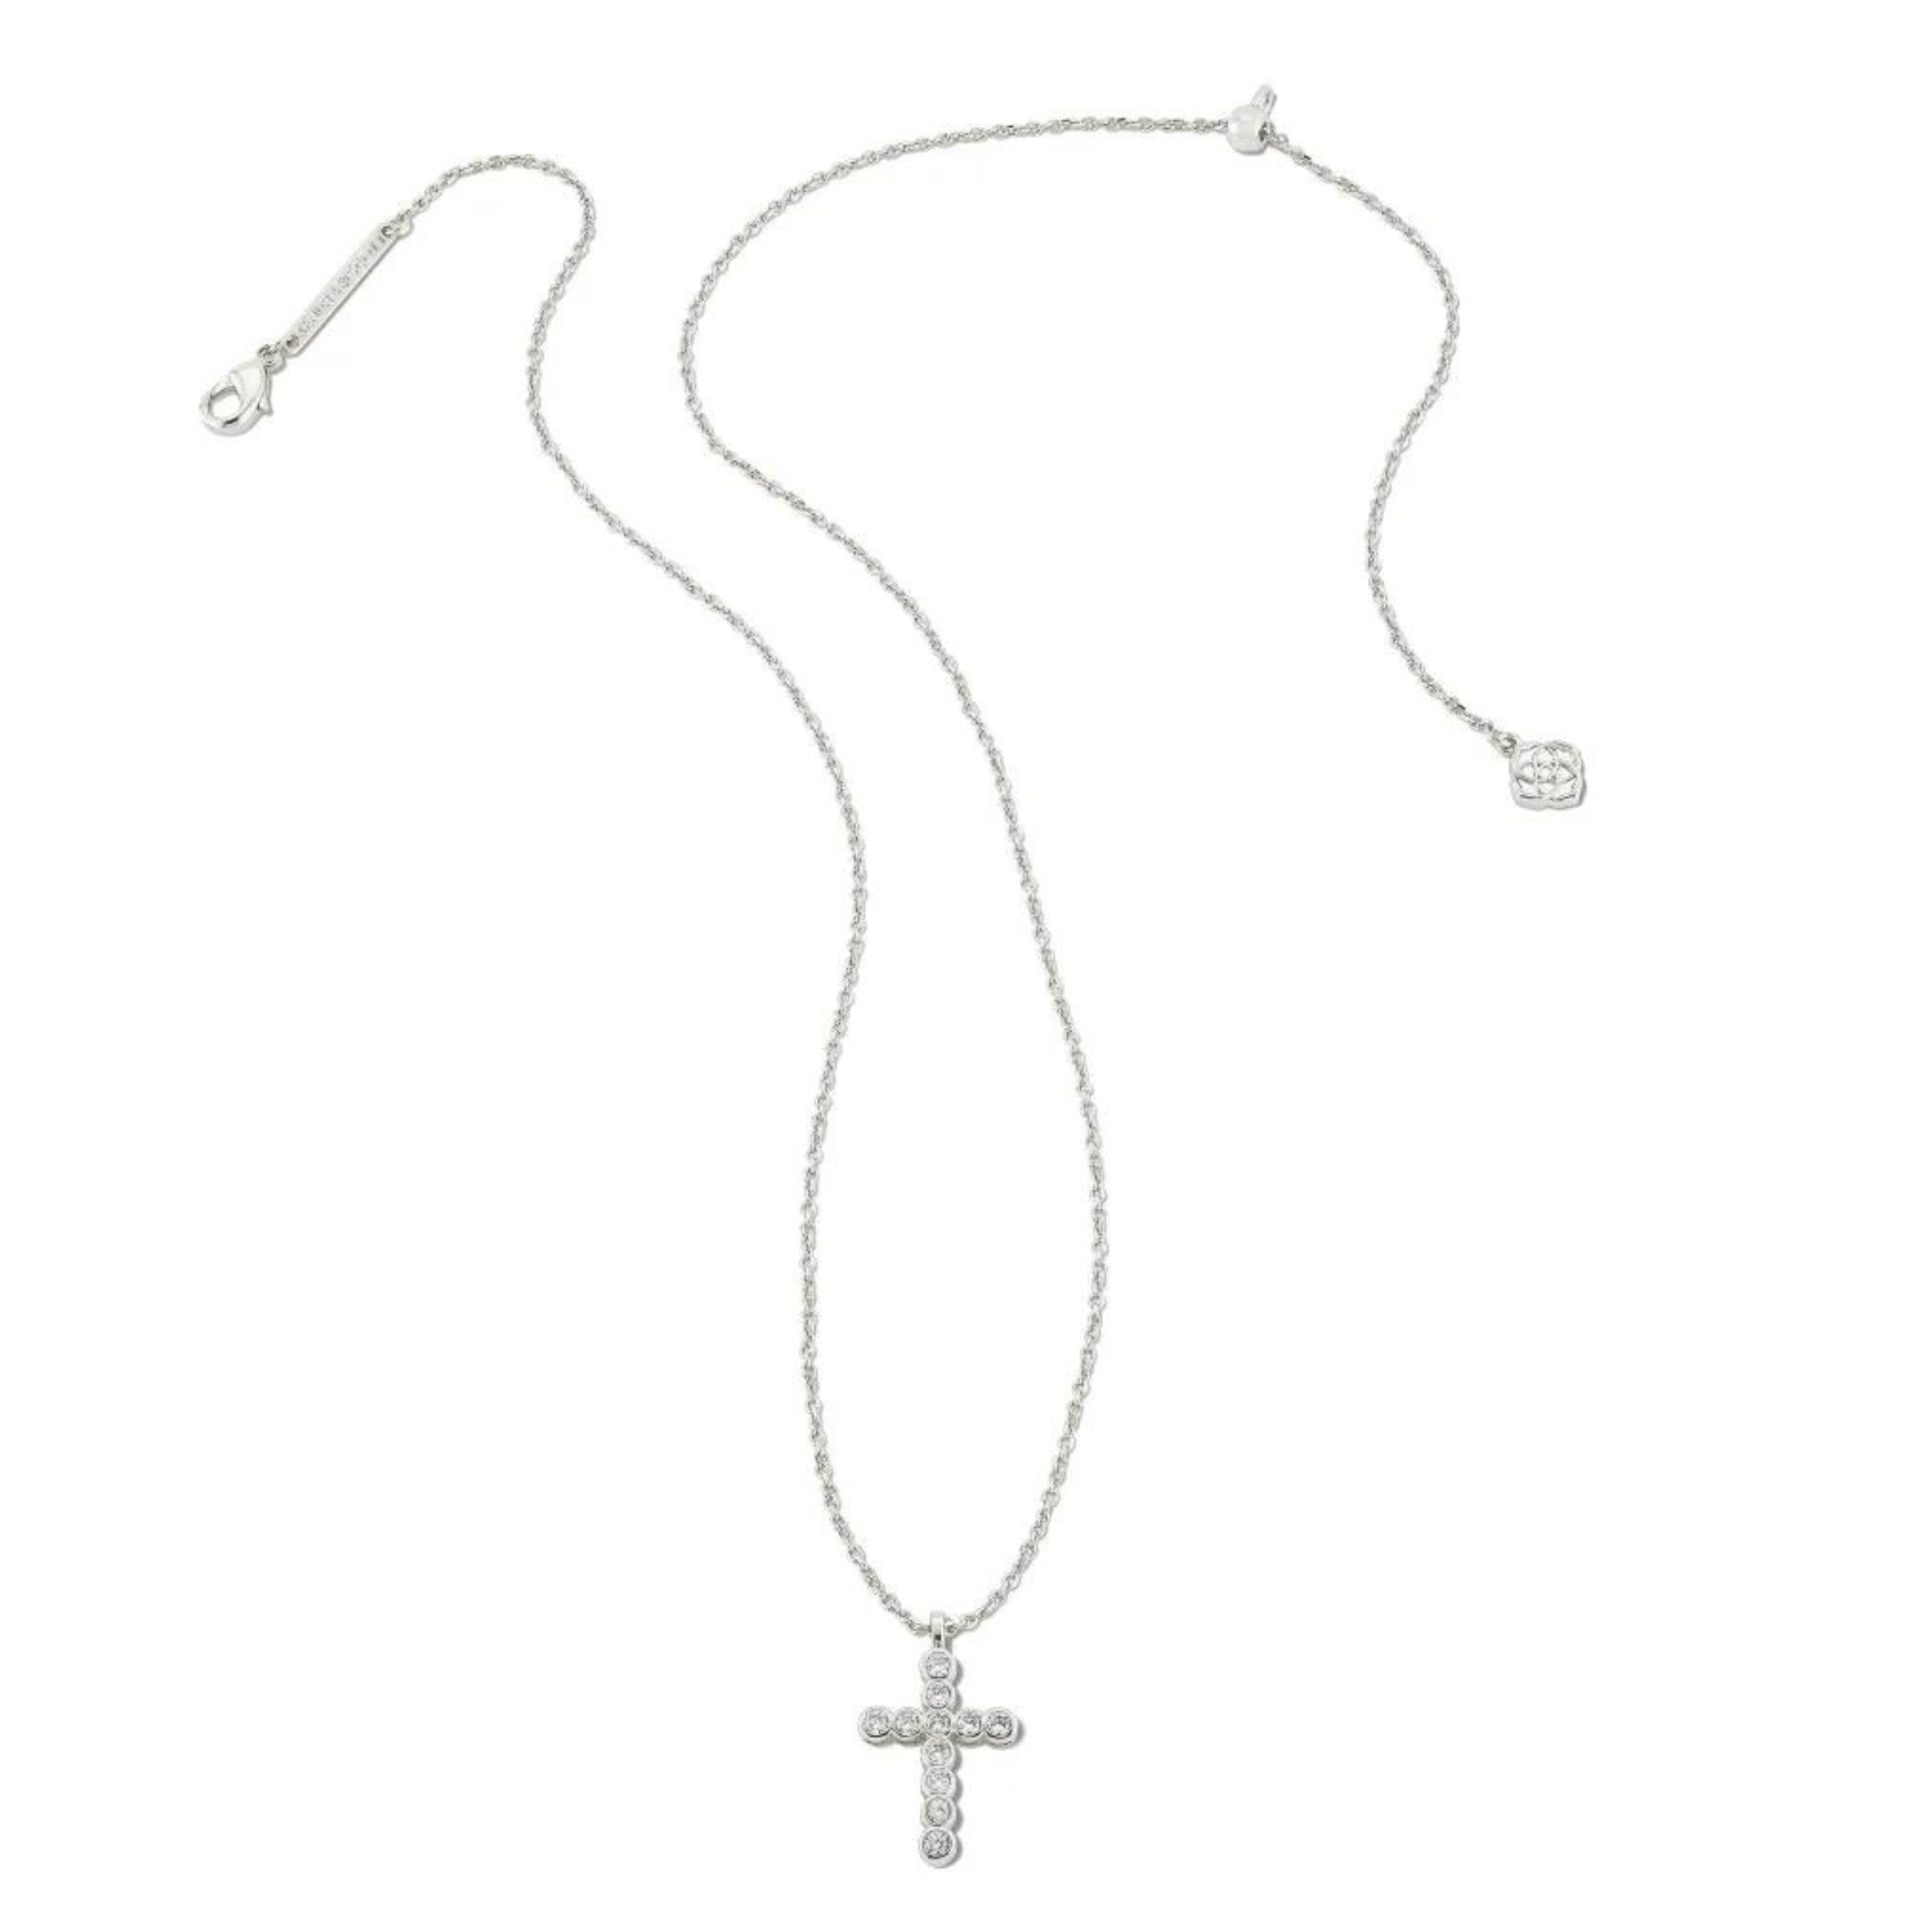 Kendra Scott | Cross Silver Pendant Necklace in White Crystal - Giddy Up Glamour Boutique